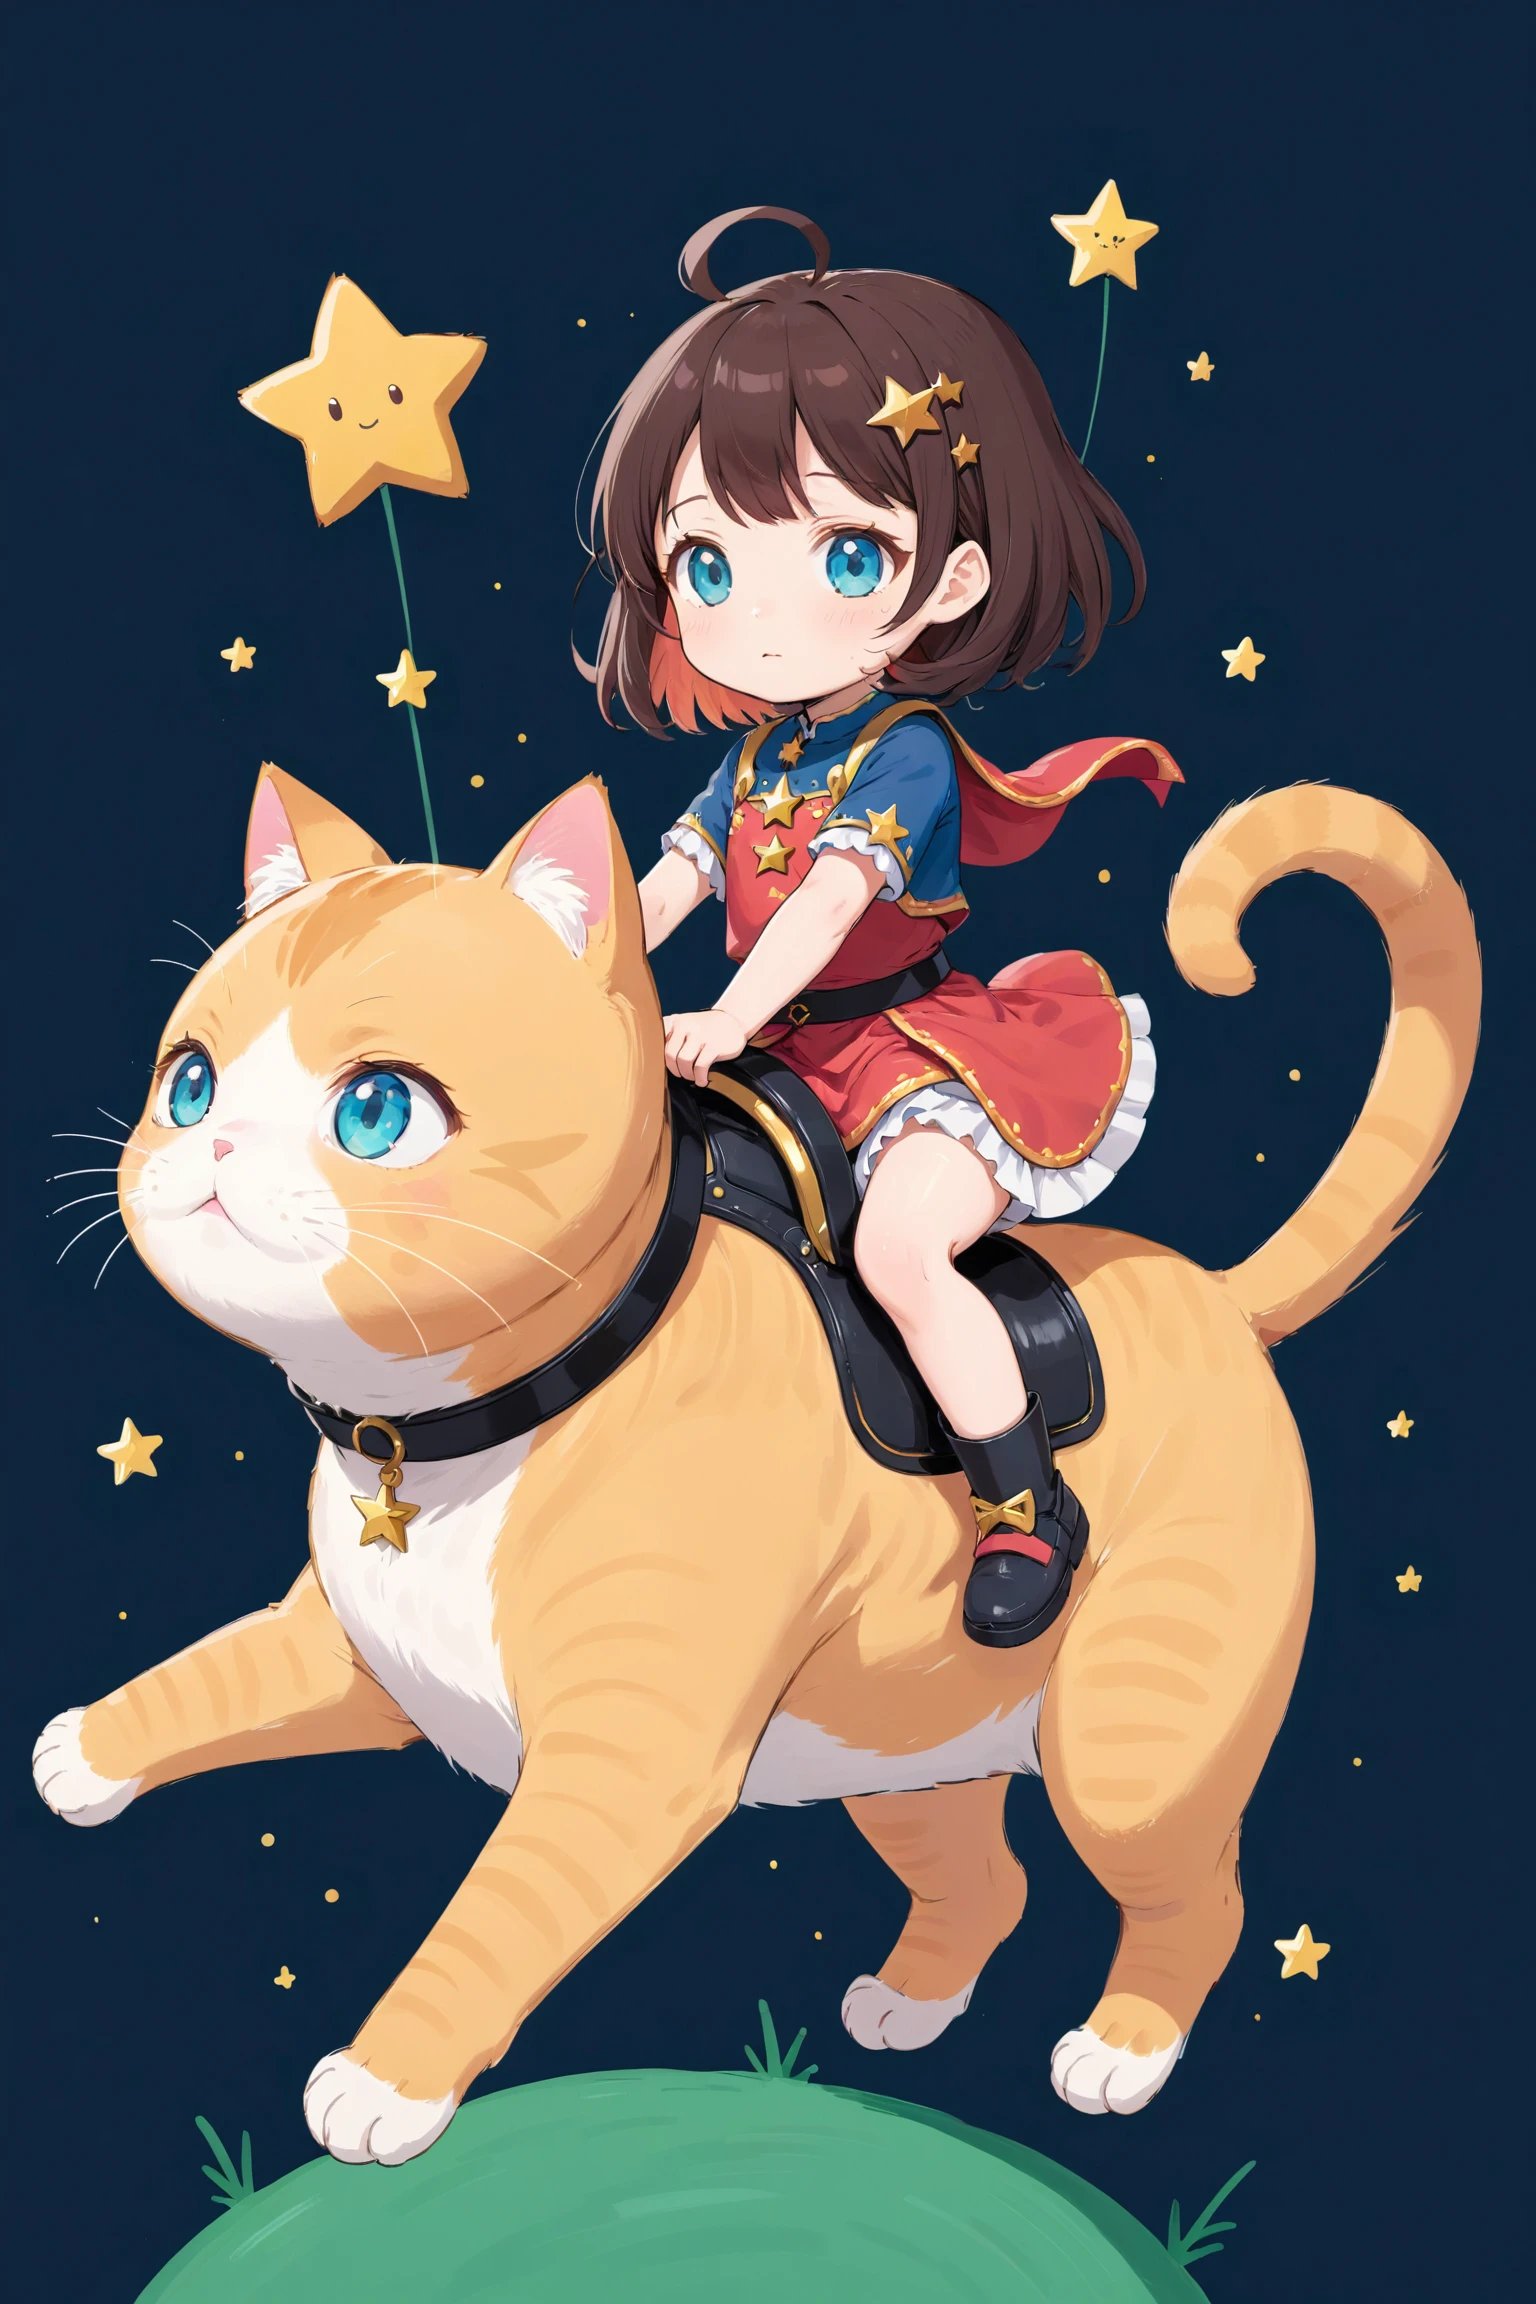 flat color, chibi, girl riding giant cat, stars, simple background